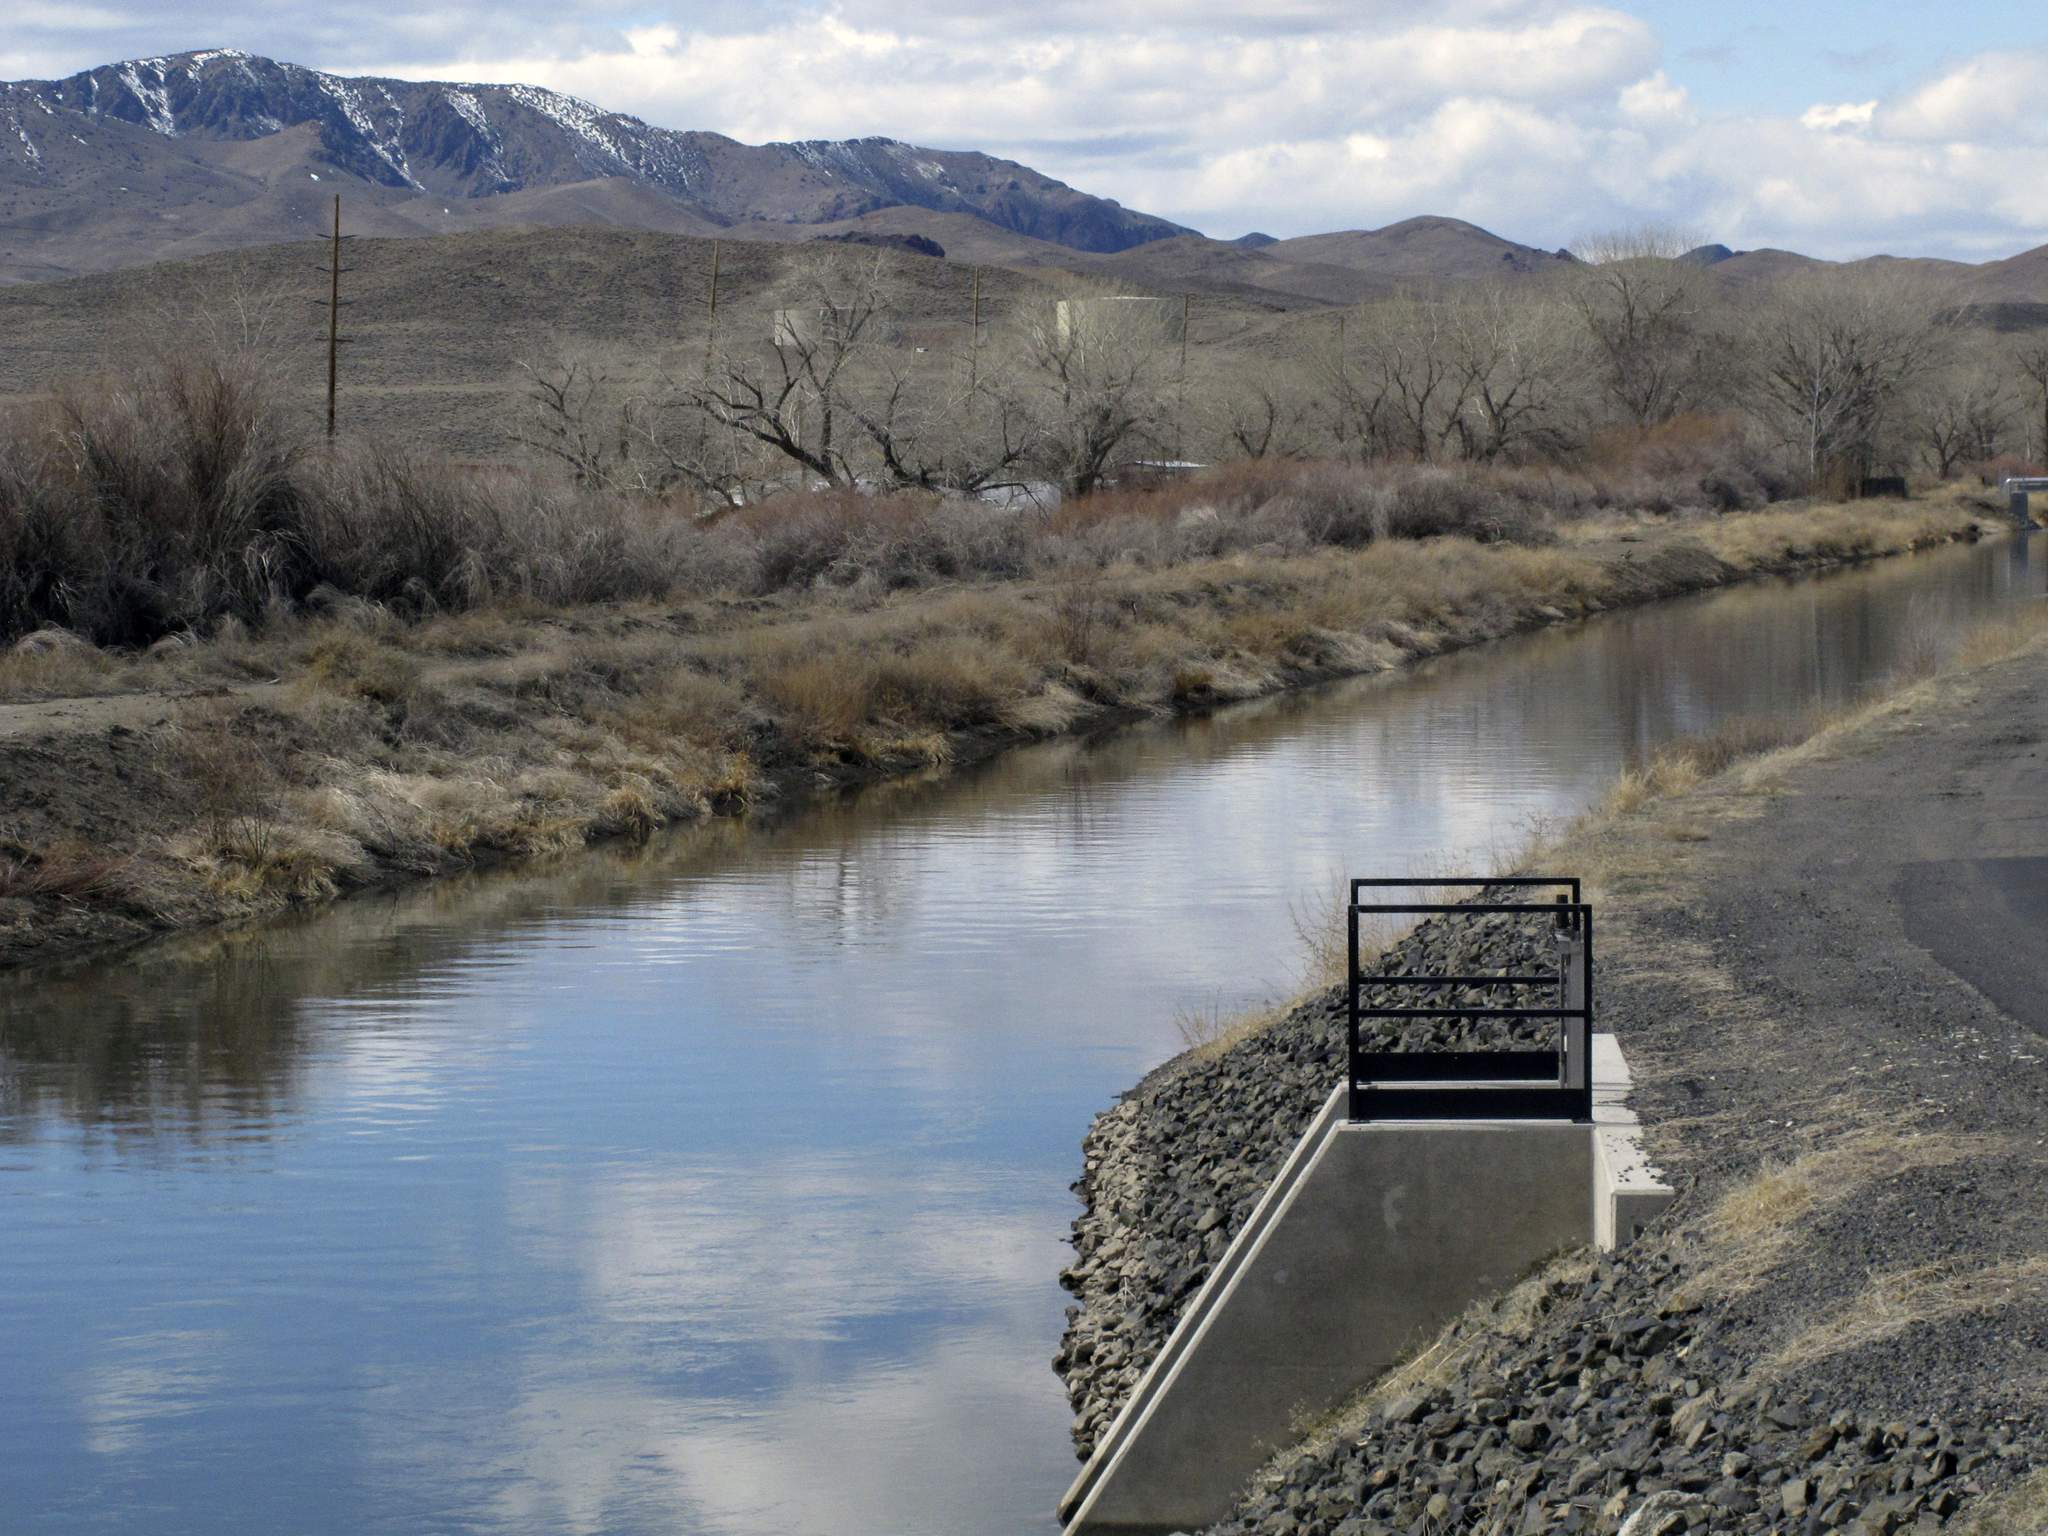 Feds want to fix canal, but Nevada town lives off the leaks